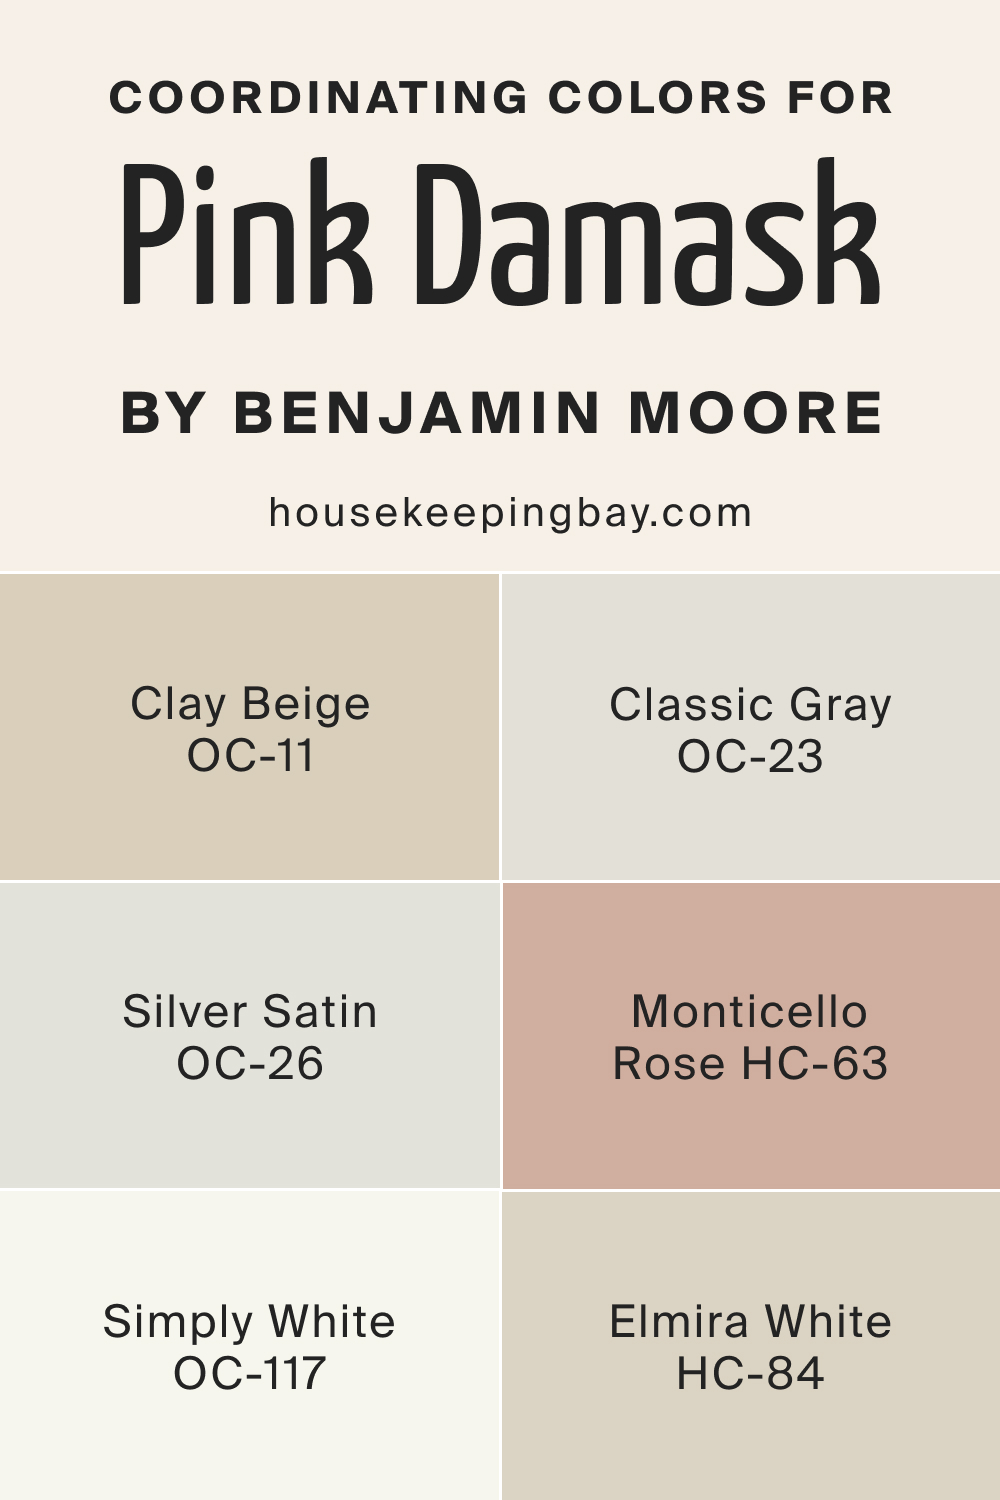 Coordinating Colors for Pink Damask OC 72 by Benjamin Moore